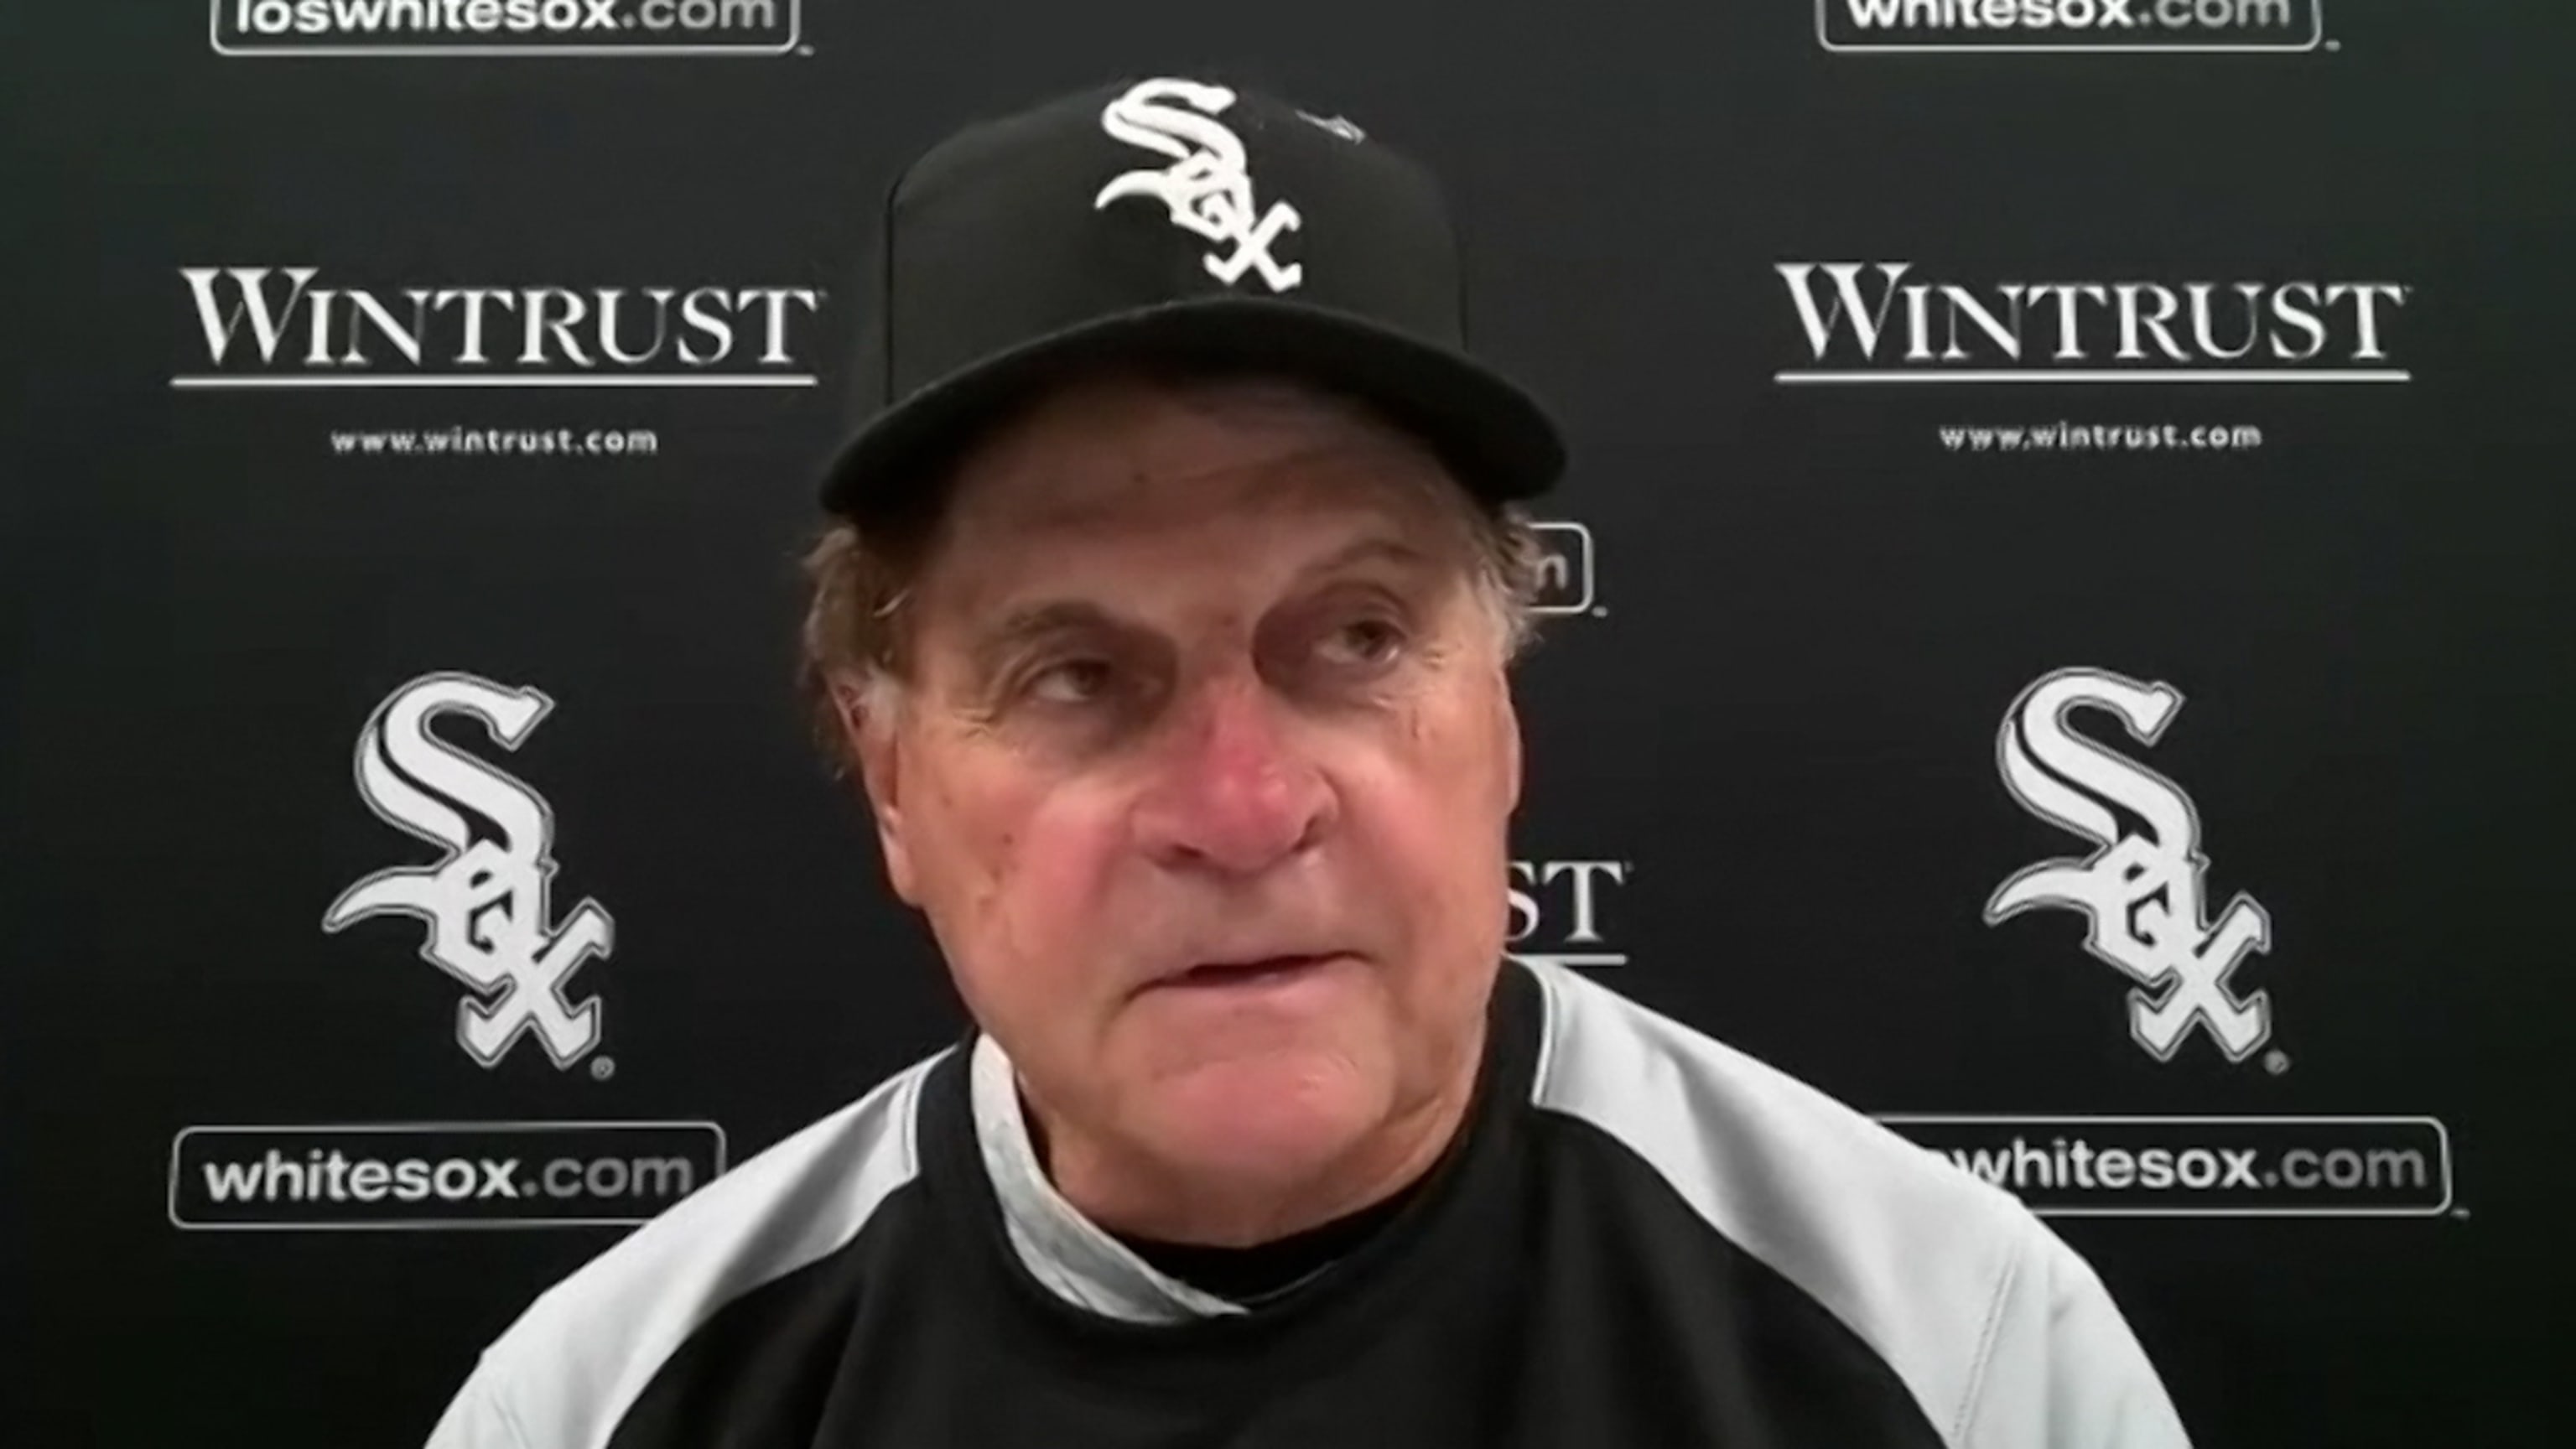 Carlos Rodon's no-hitter assures him of place in White Sox lore